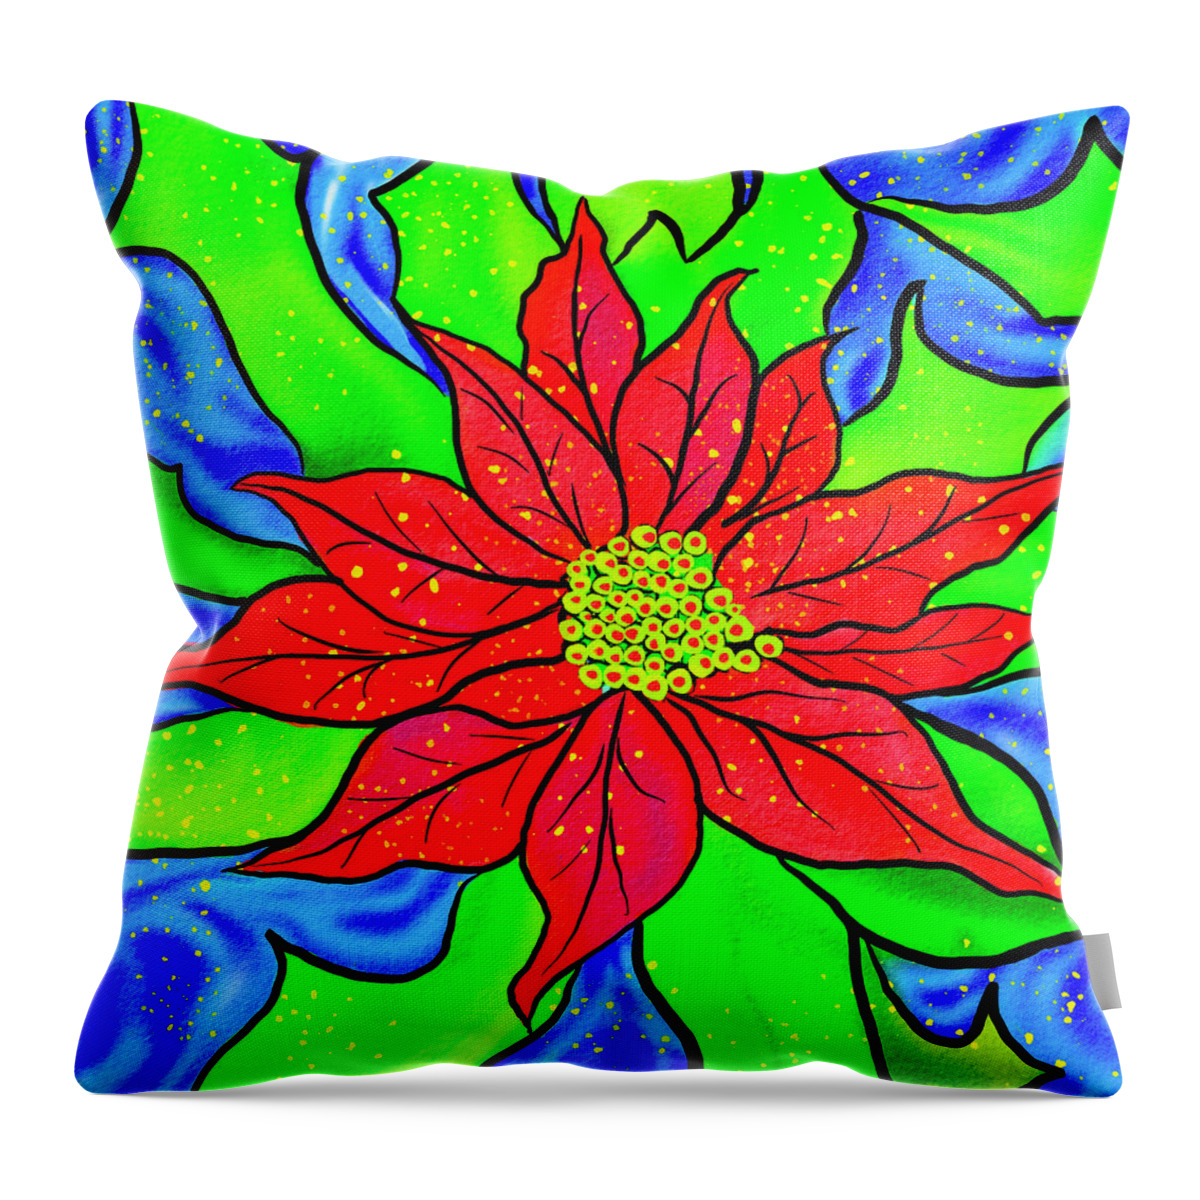 Red Poinsettia Throw Pillow featuring the digital art Red Poinsettia stylized art by Tatiana Travelways